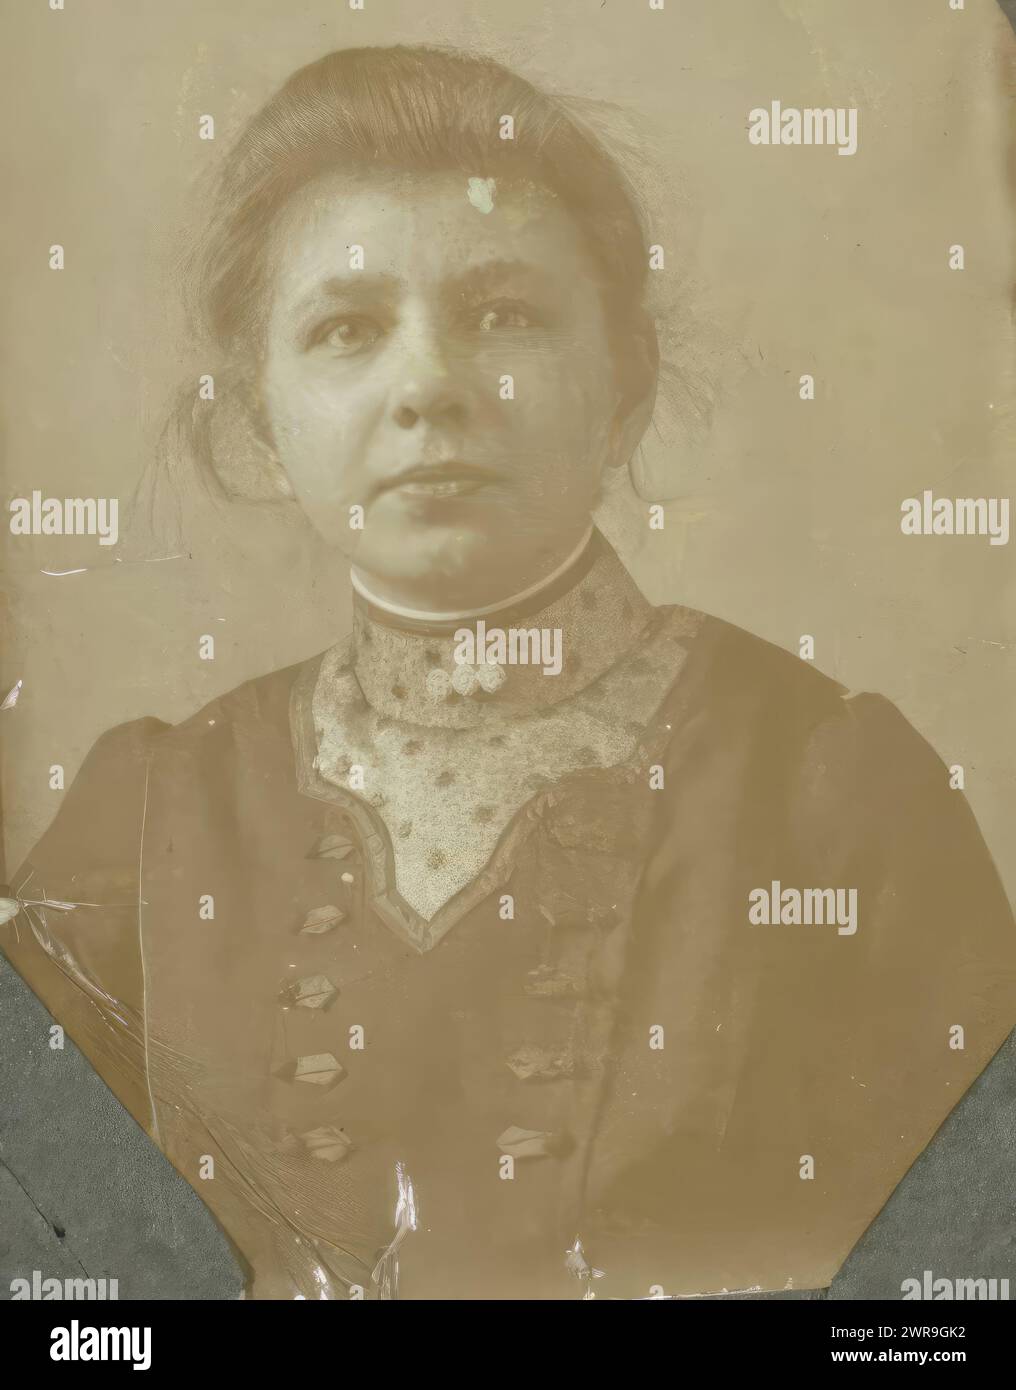 Portrait of a woman with updo hair, referred to as 'Aunt Sien', Part of Album with vending machine photos of a Dutch family., anonymous, Netherlands, c. 1910 - c. 1920, cardboard, gelatin silver print, height 40 mm × width 29 mm, photograph Stock Photo